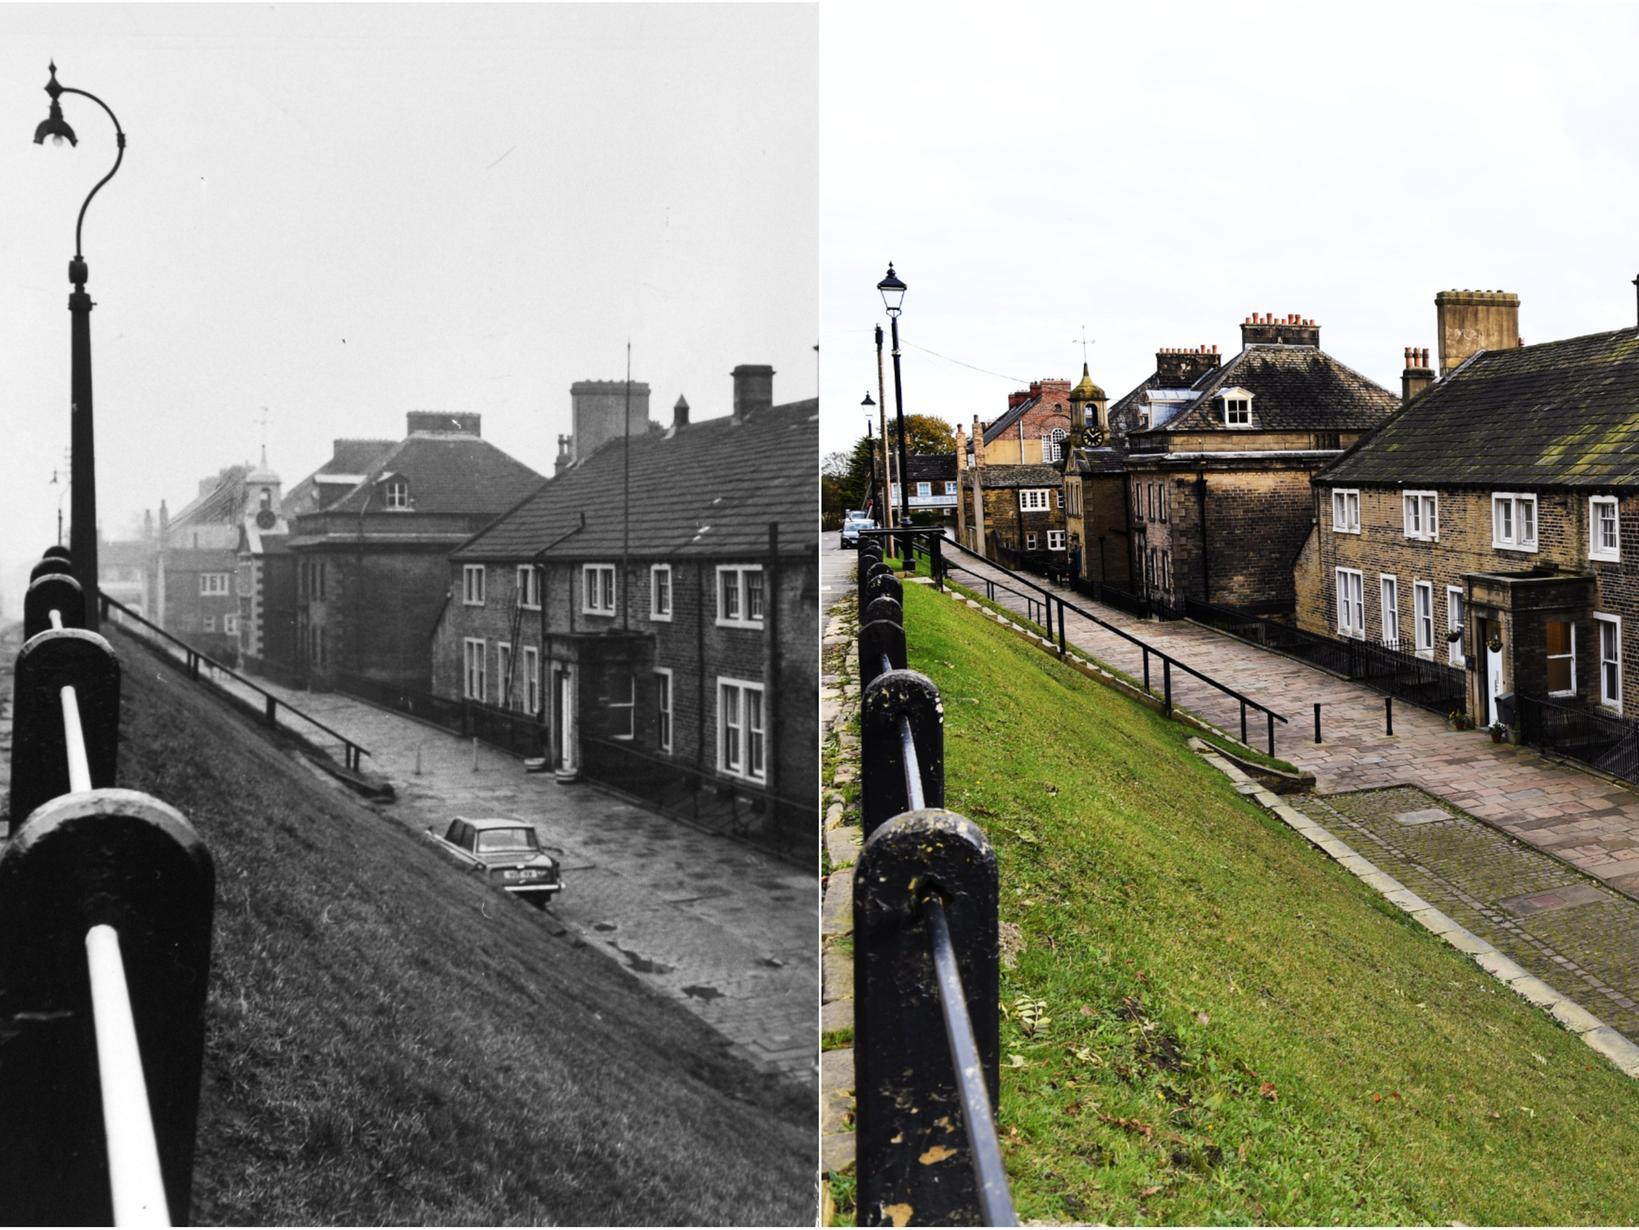 Enjoy the fascinating contrast between Pudsey's past and present.